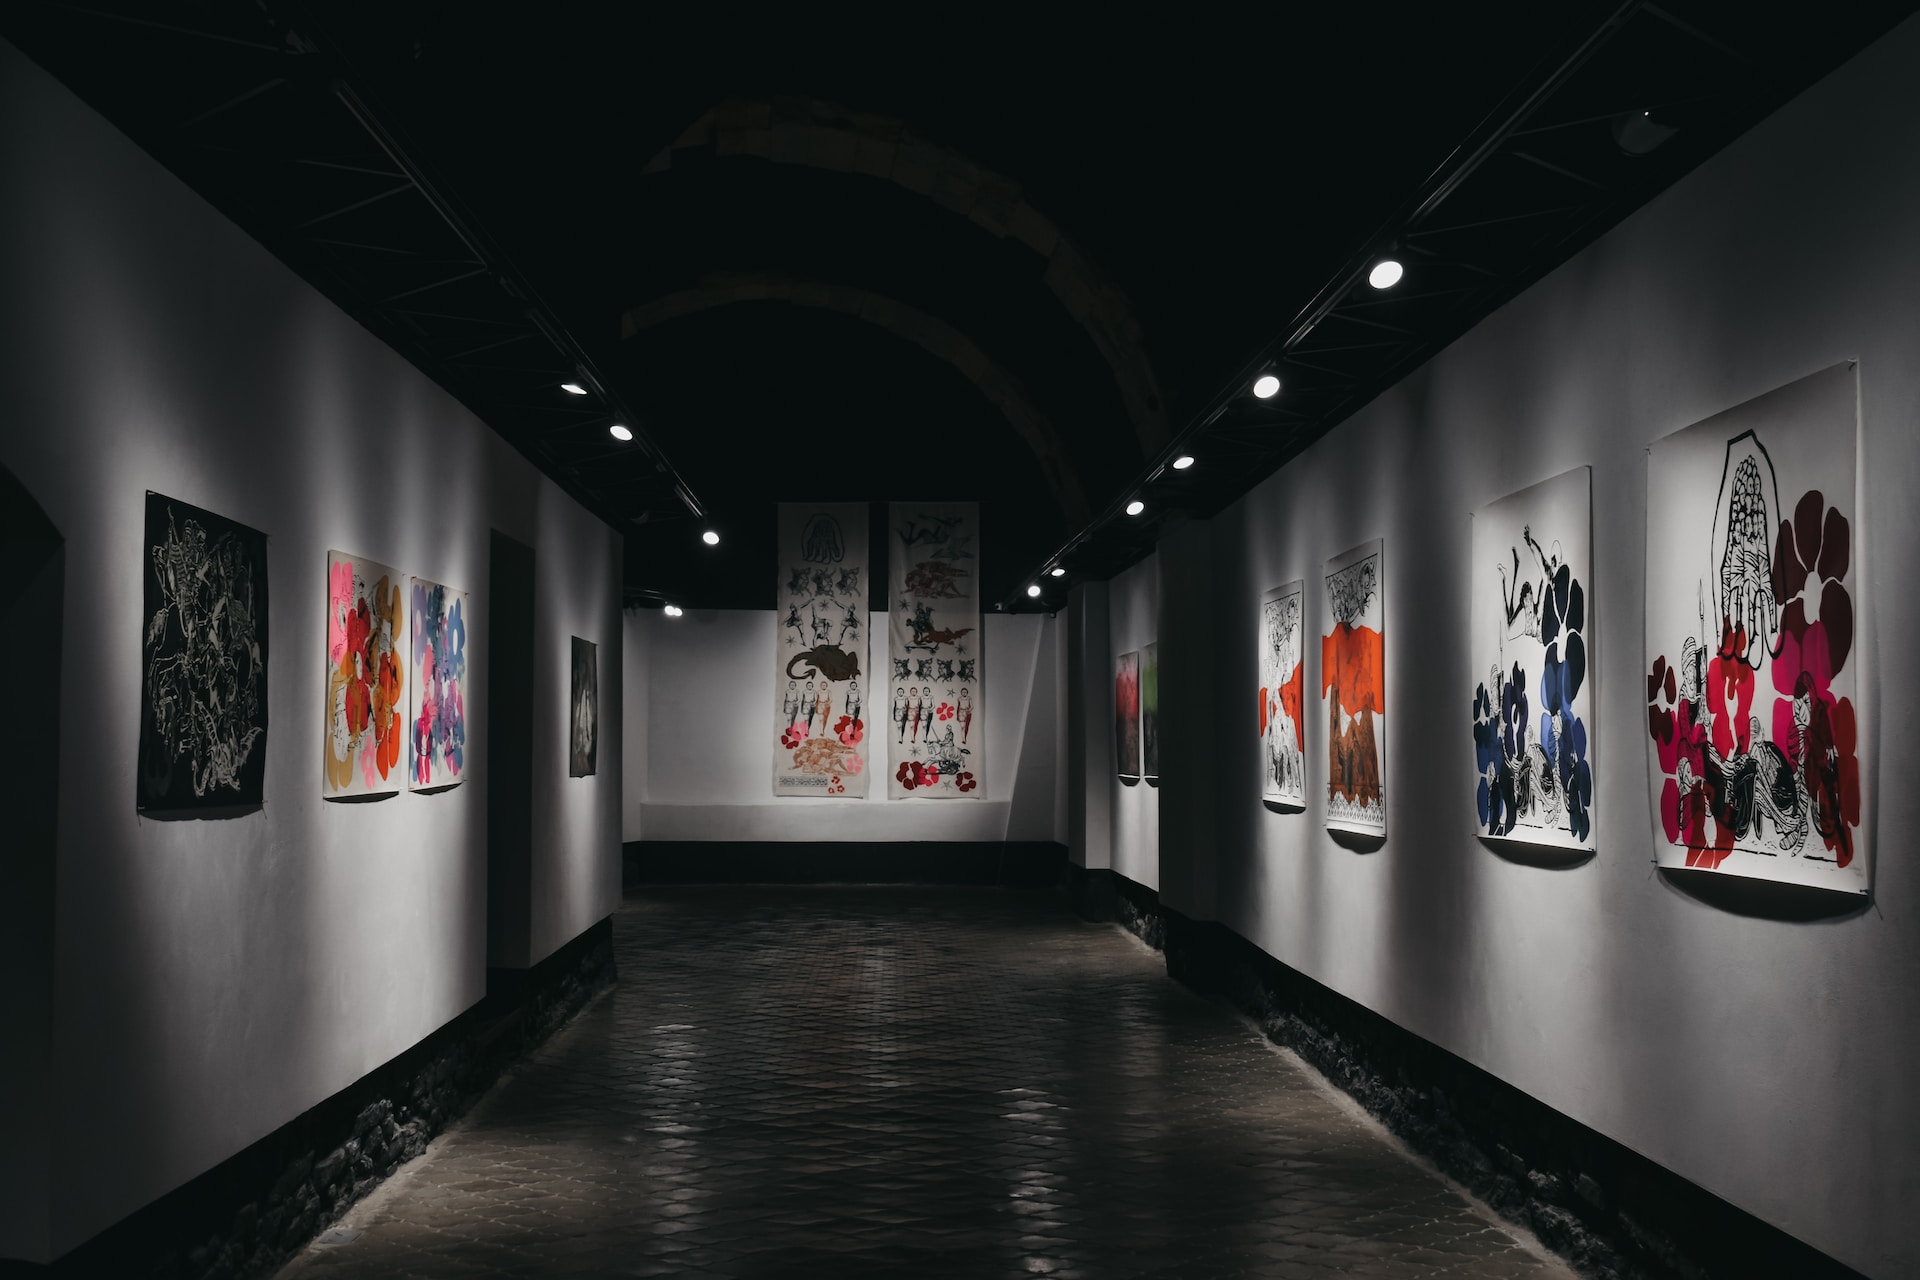 description: An image of a hallway in an art gallery.  Colorful paintings hang on the walls to the left and right, and also on the wall ahead.  Photo by Darya Tryfanava on Unsplash.